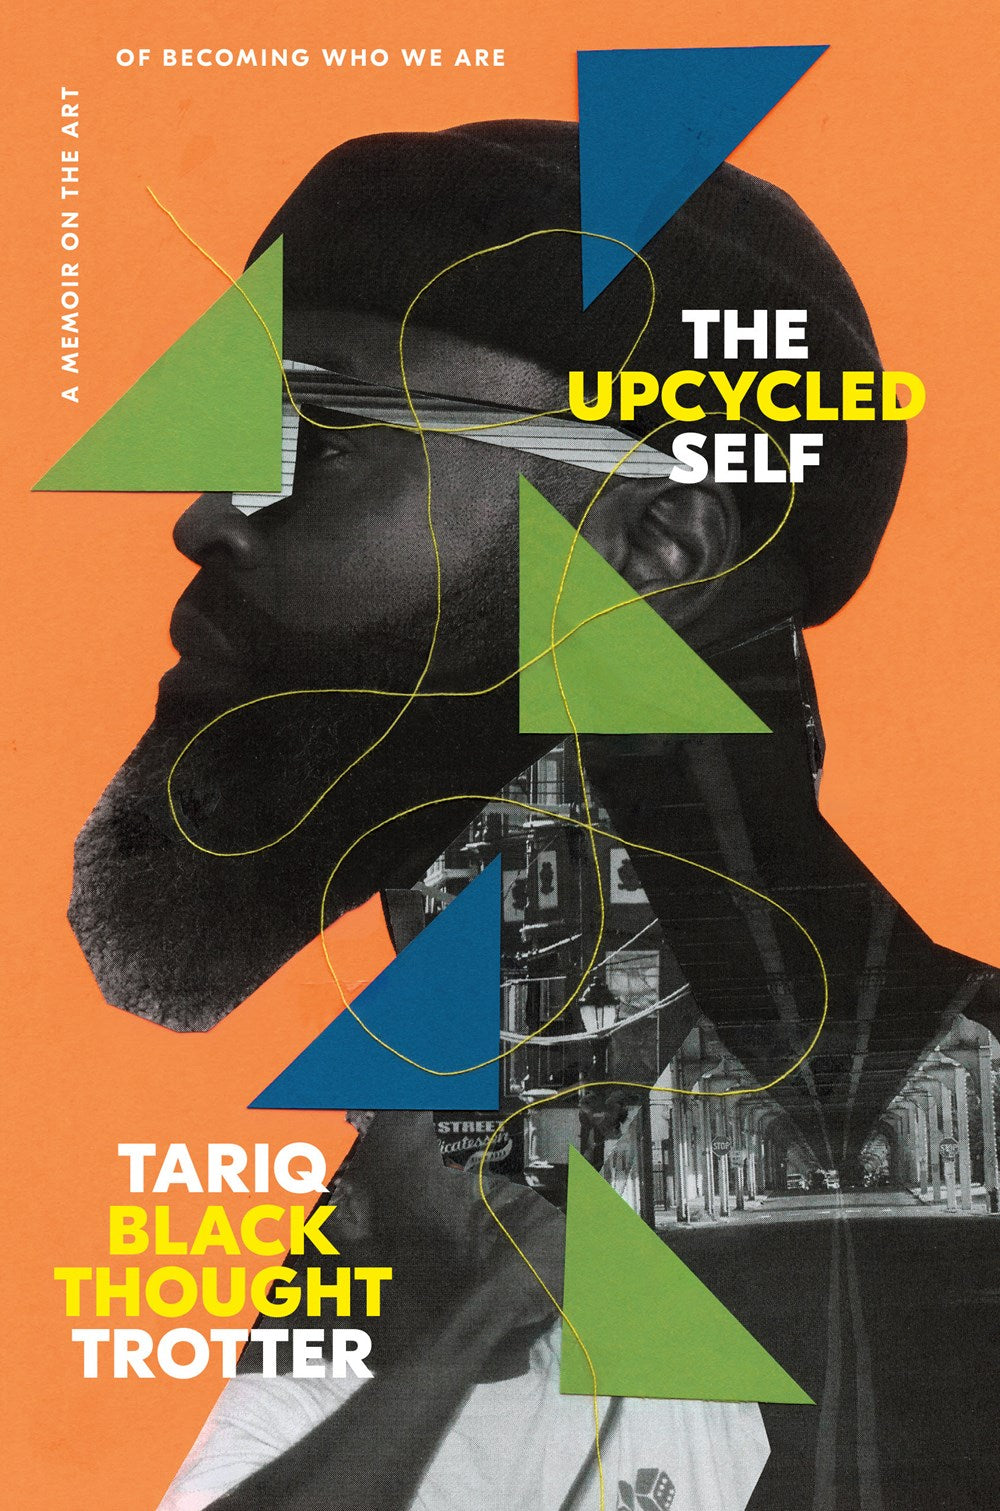 PRE-ORDER: The Upcycled Self: A Memoir on the Art of Becoming Who We Are